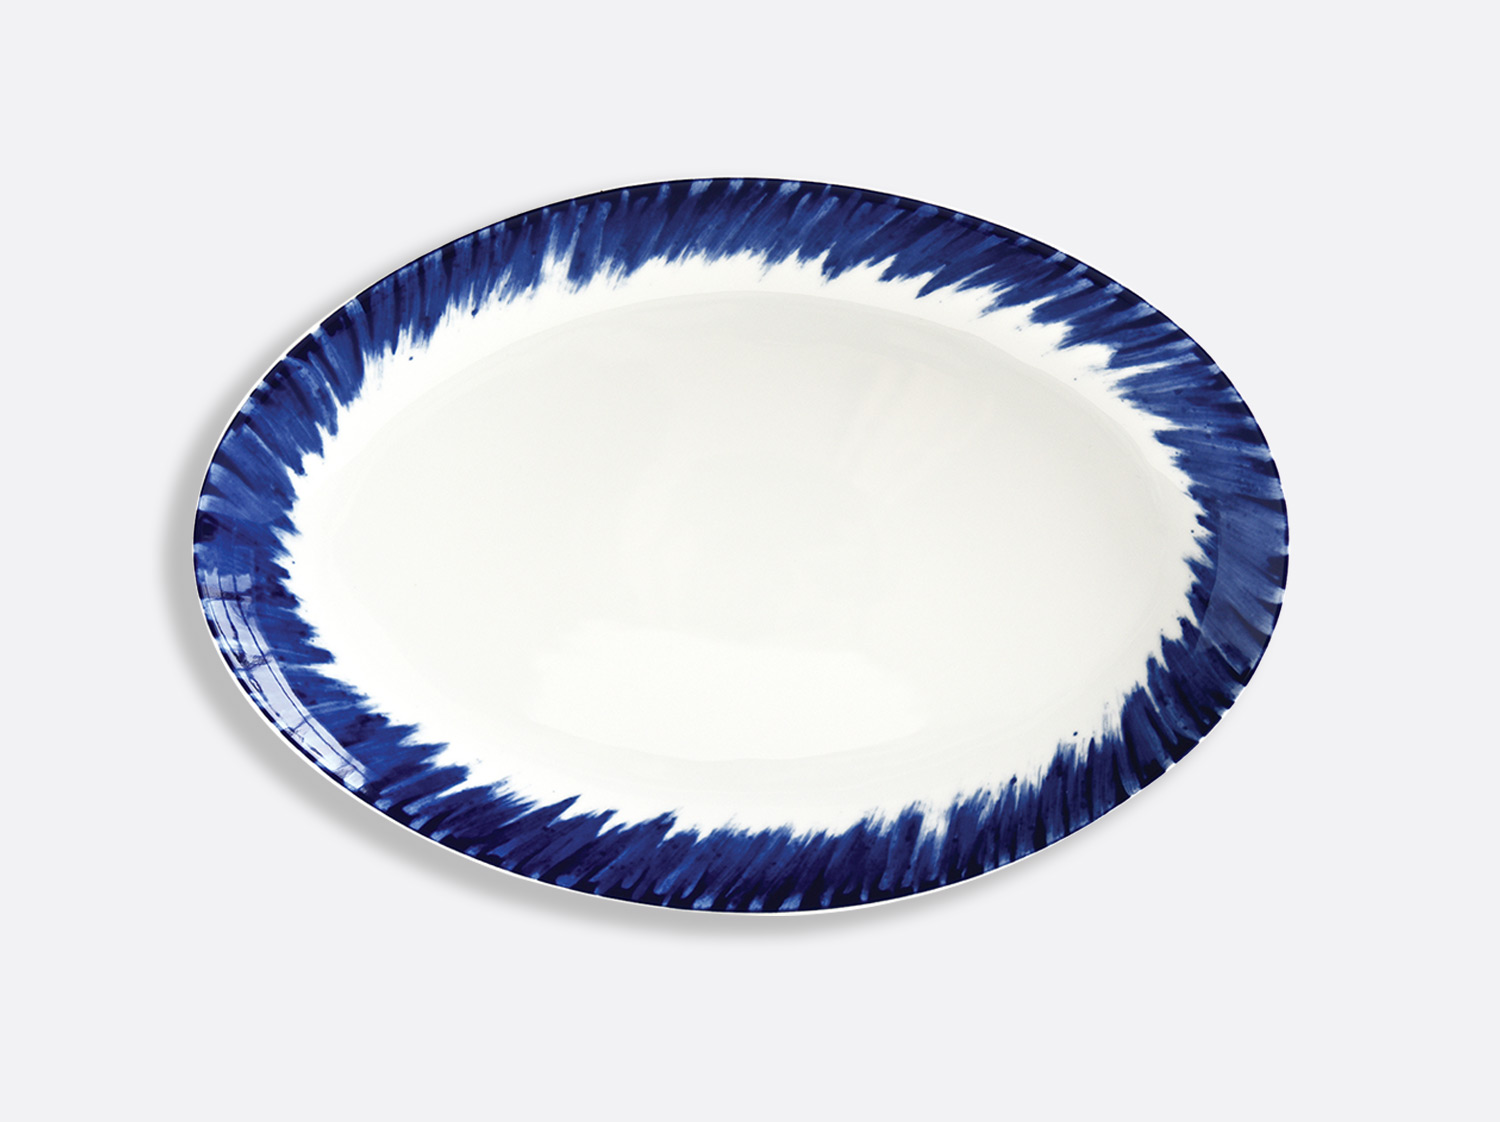 China Oval platter 15'' of the collection IN BLOOM - Zemer Peled | Bernardaud